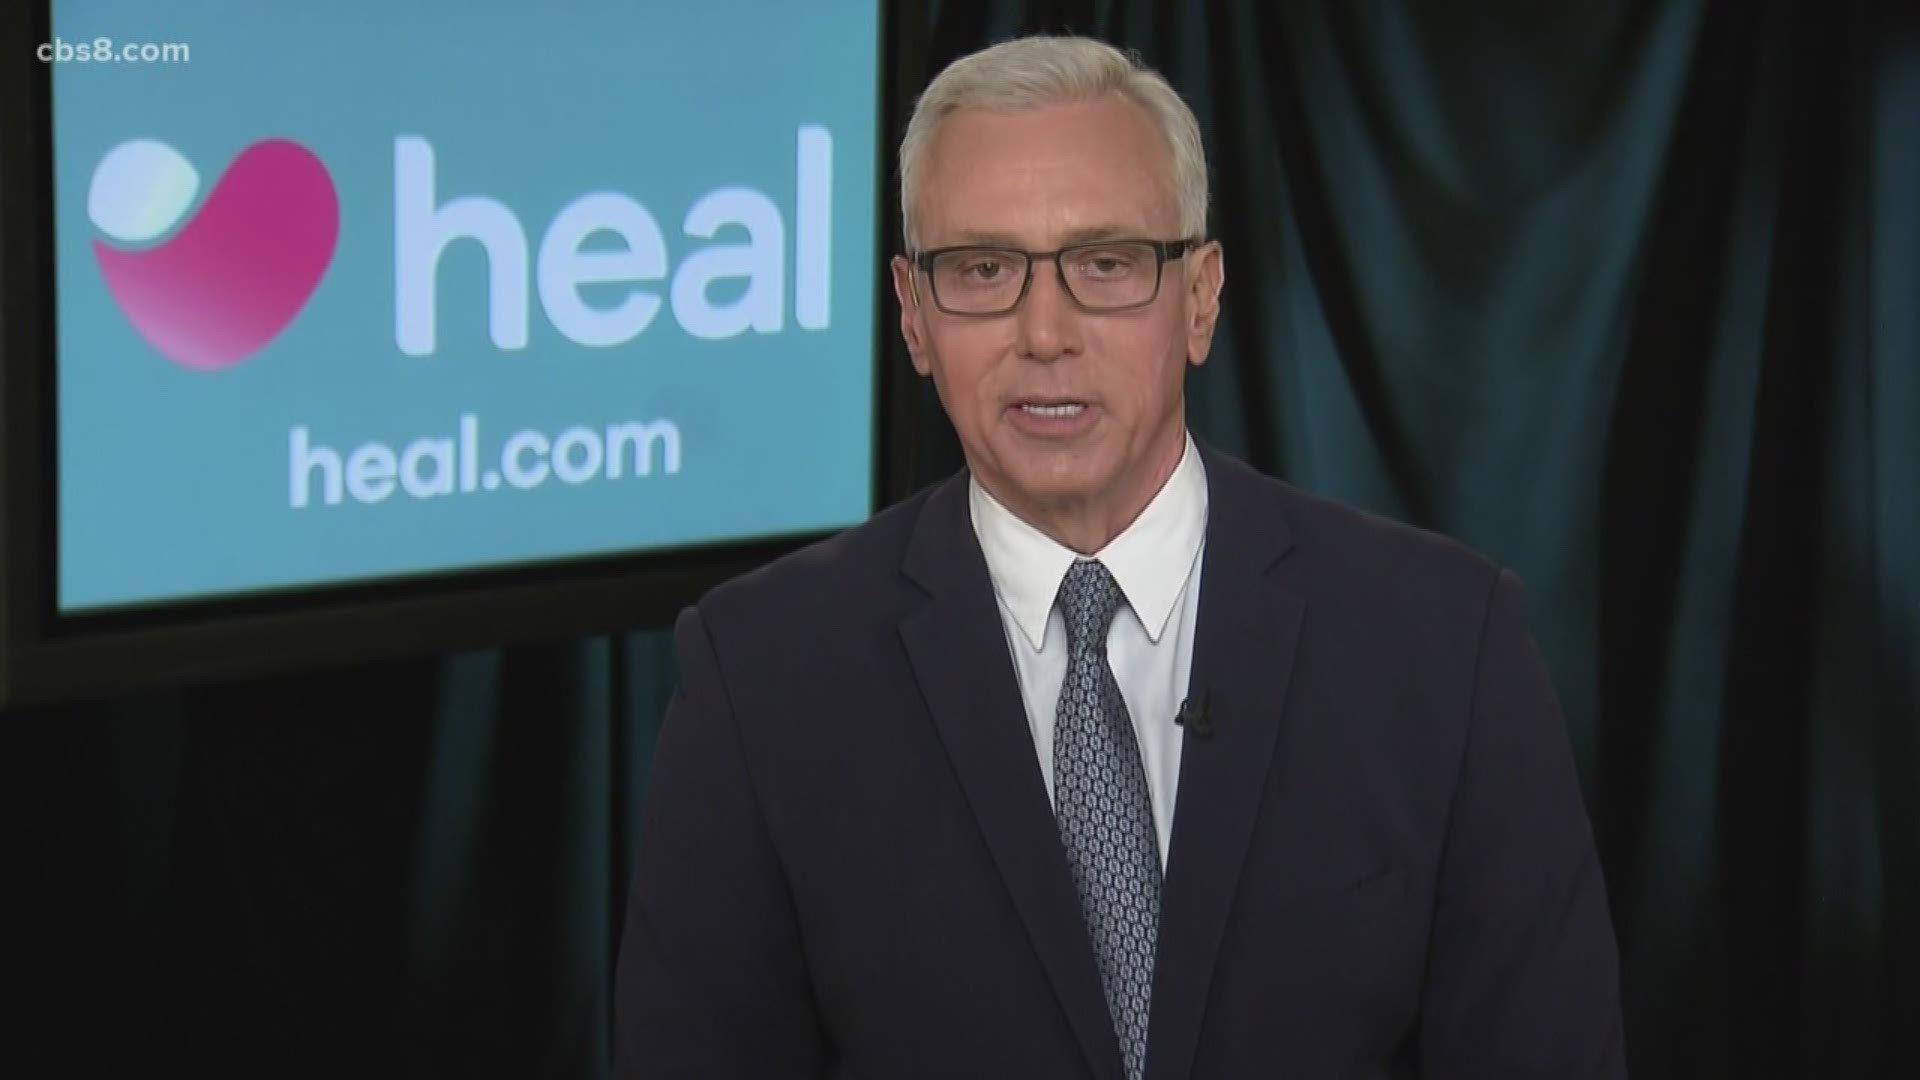 Dr. Drew Pinksy has teamed up with Heal, a house call service for people who need doctors